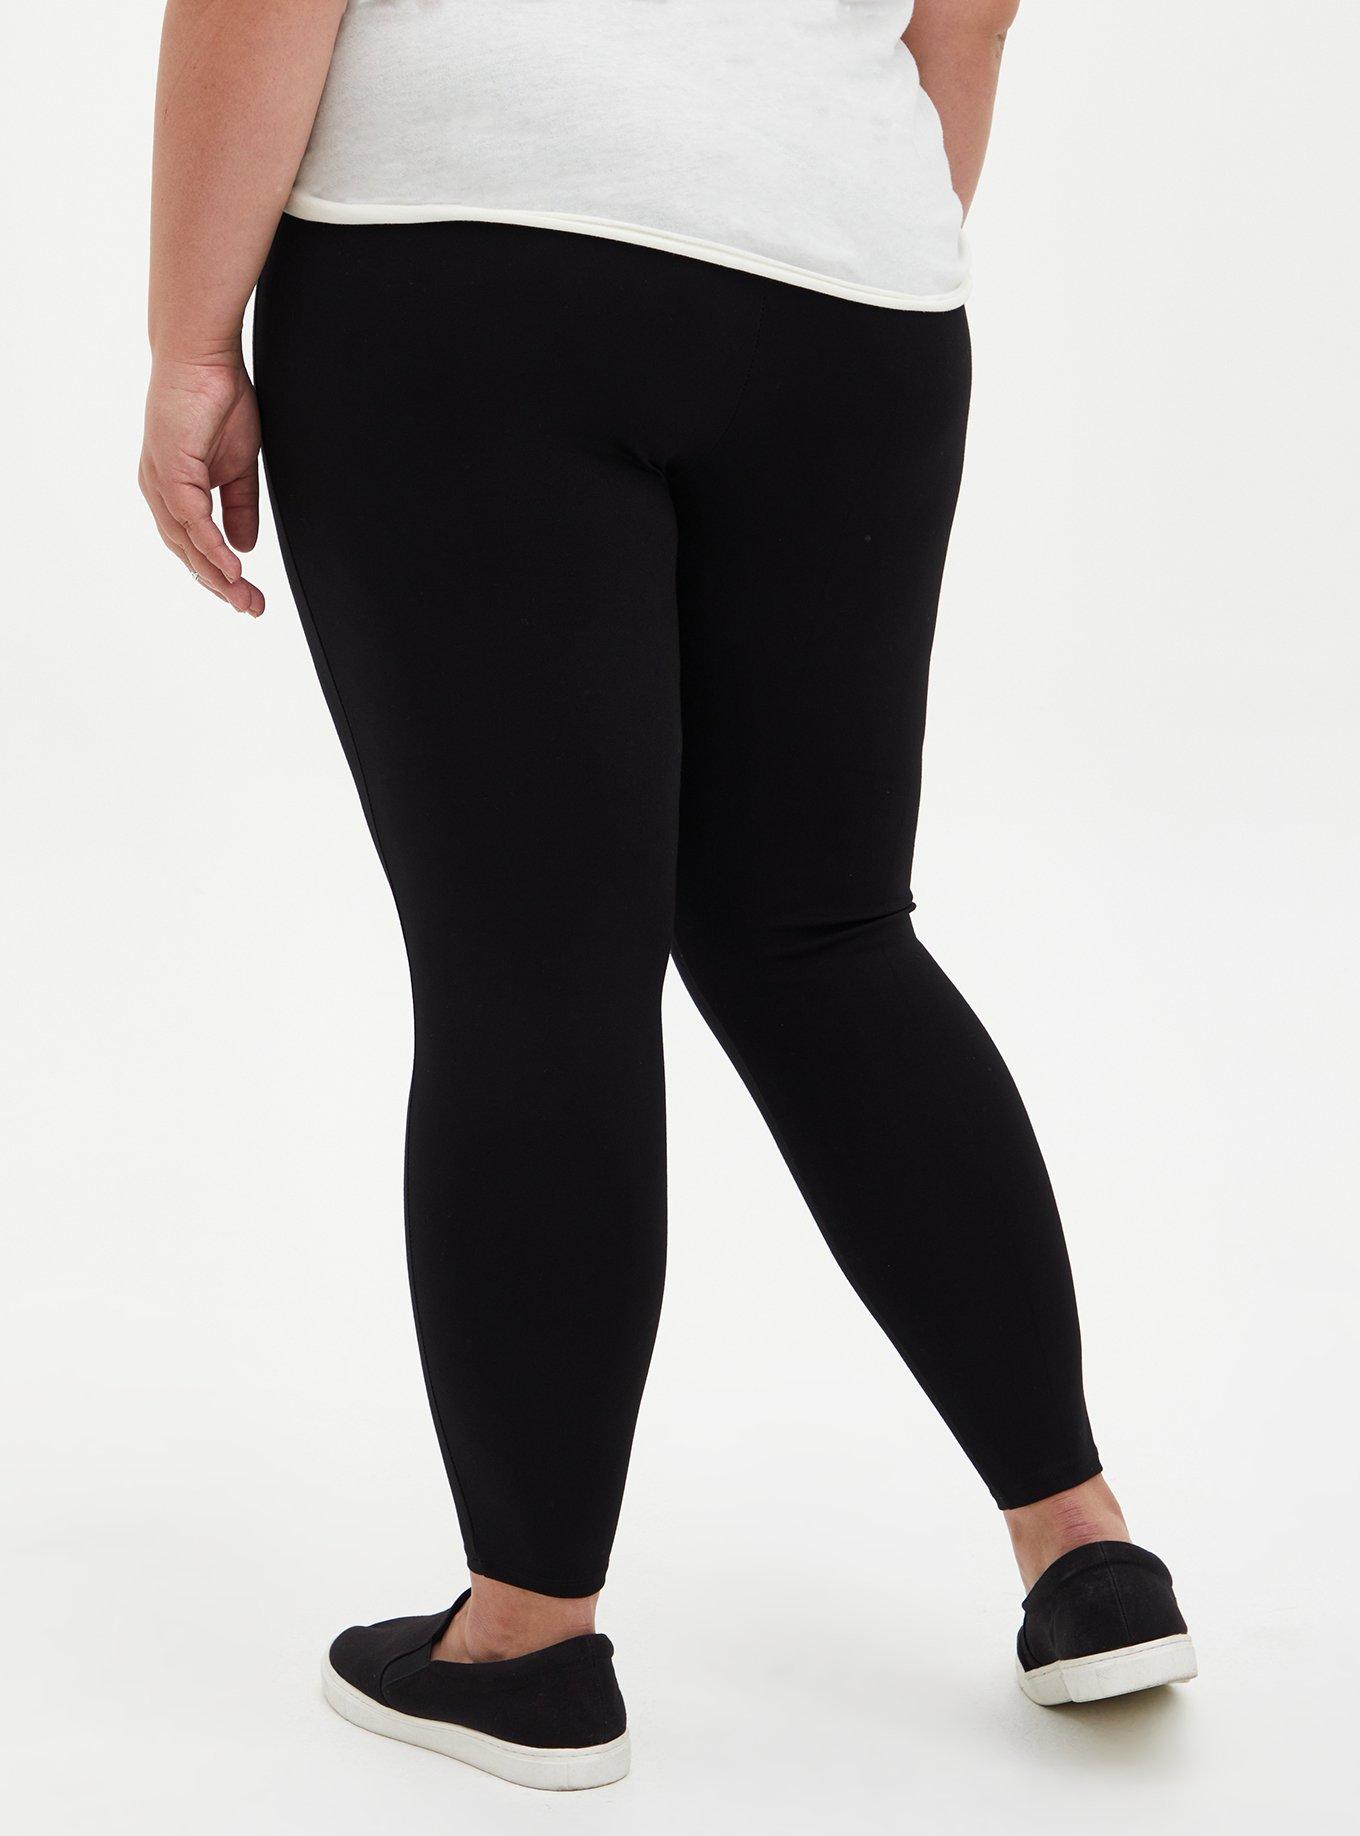 New Red Hot Label Black Tailored Ponte Shaping Leggings Signature Waistband